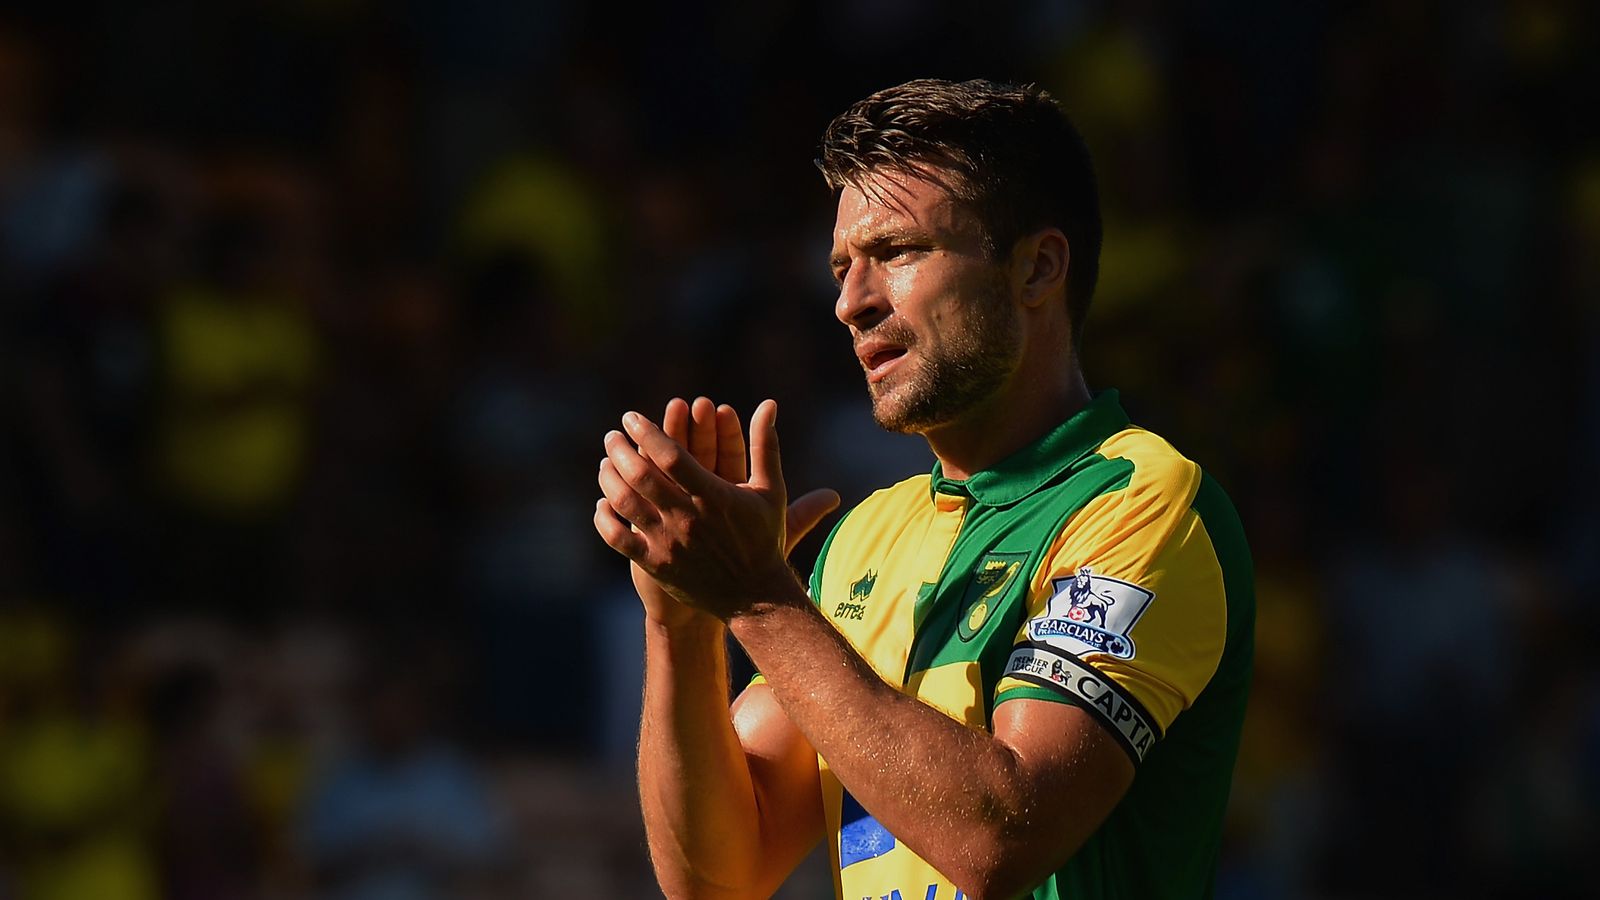 Norwich's win over Reading honours late club stalwart Peter Oldfield, Football News